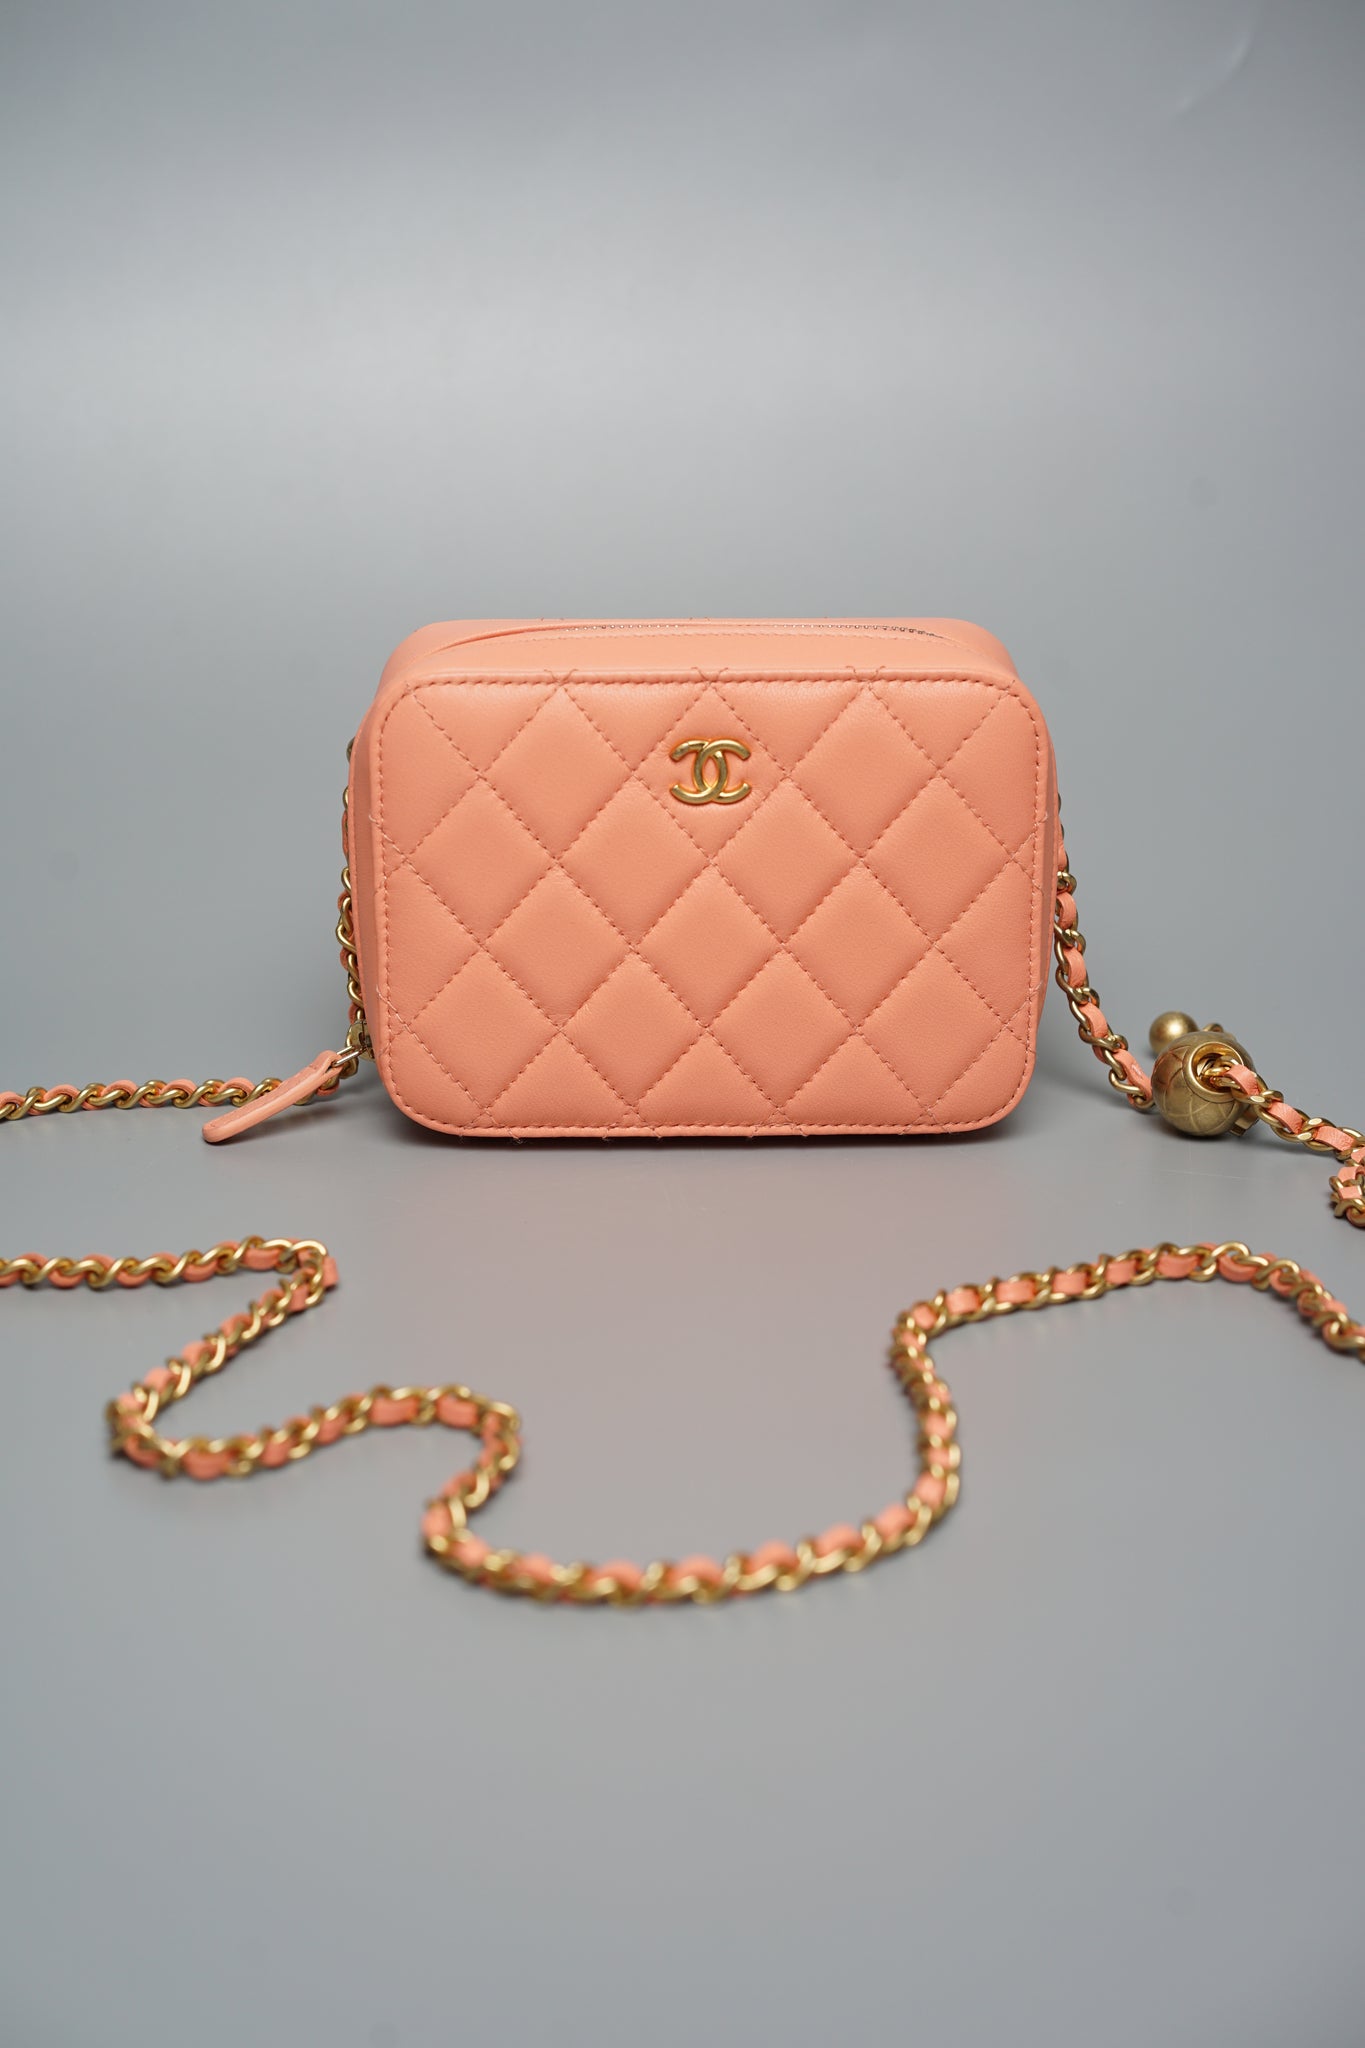 Chanel Mini Pearl Crush Quilted Camera Case in Beige Pink Bghw